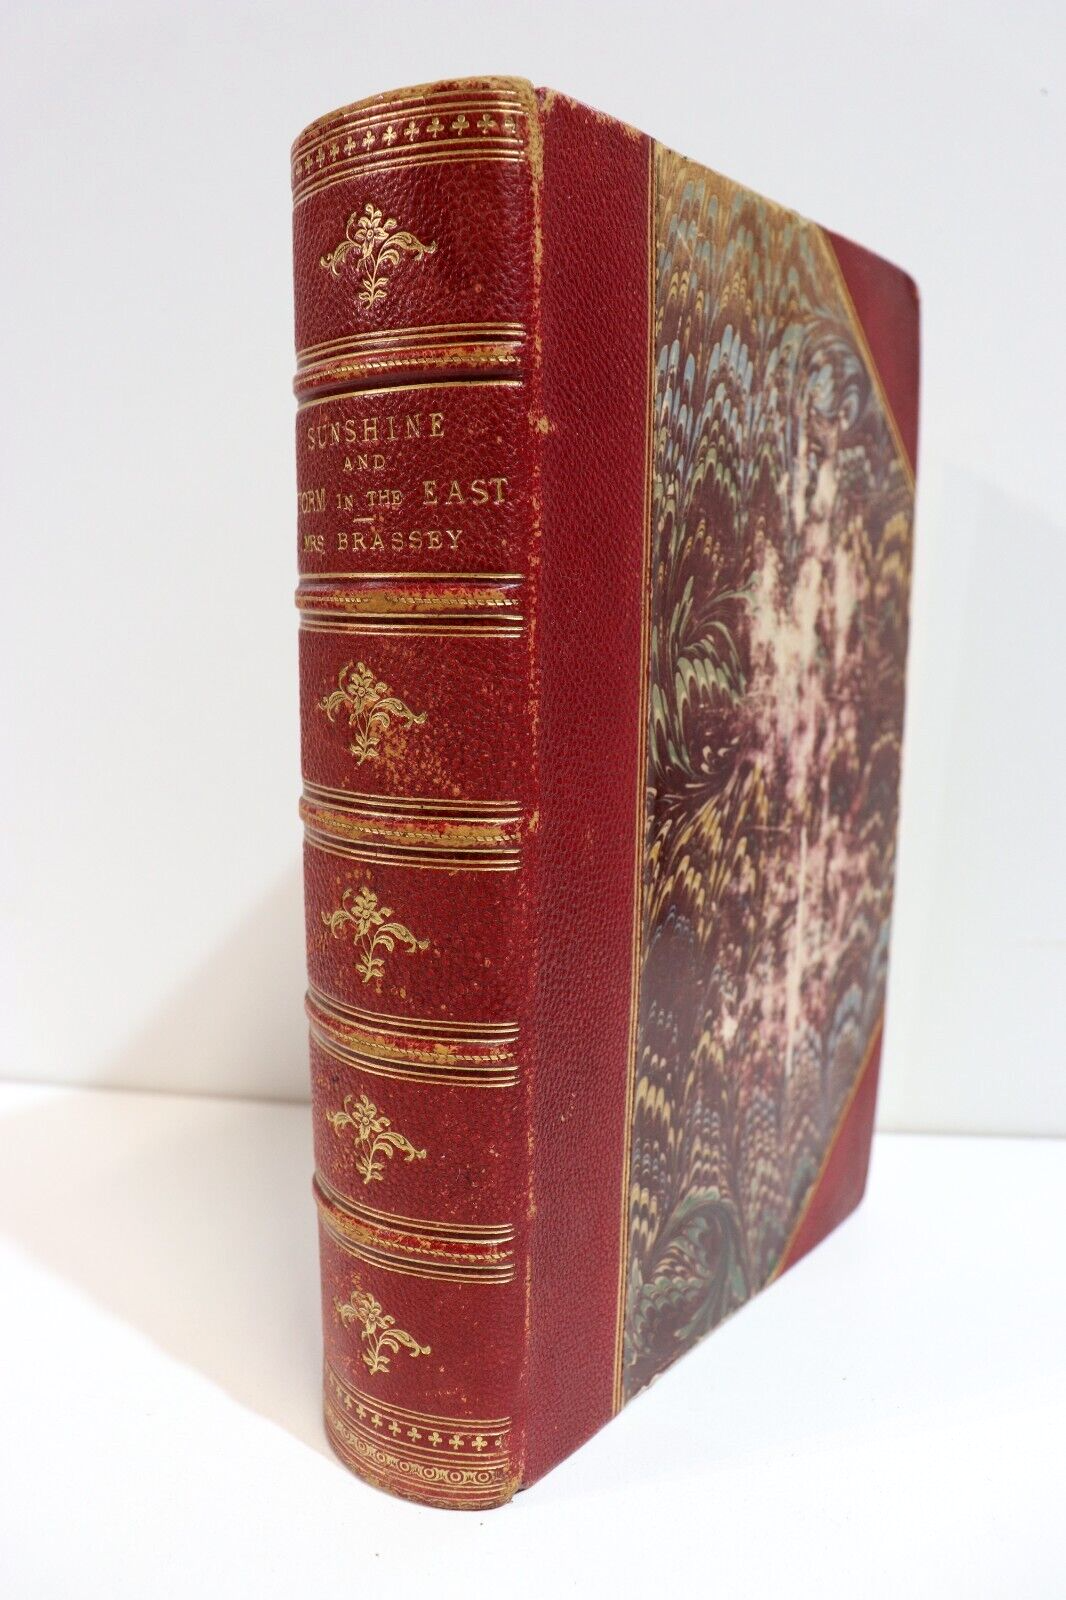 Sunshine & Storm In The East by Mrs Brassey - 1880 - Antique Exploration Book